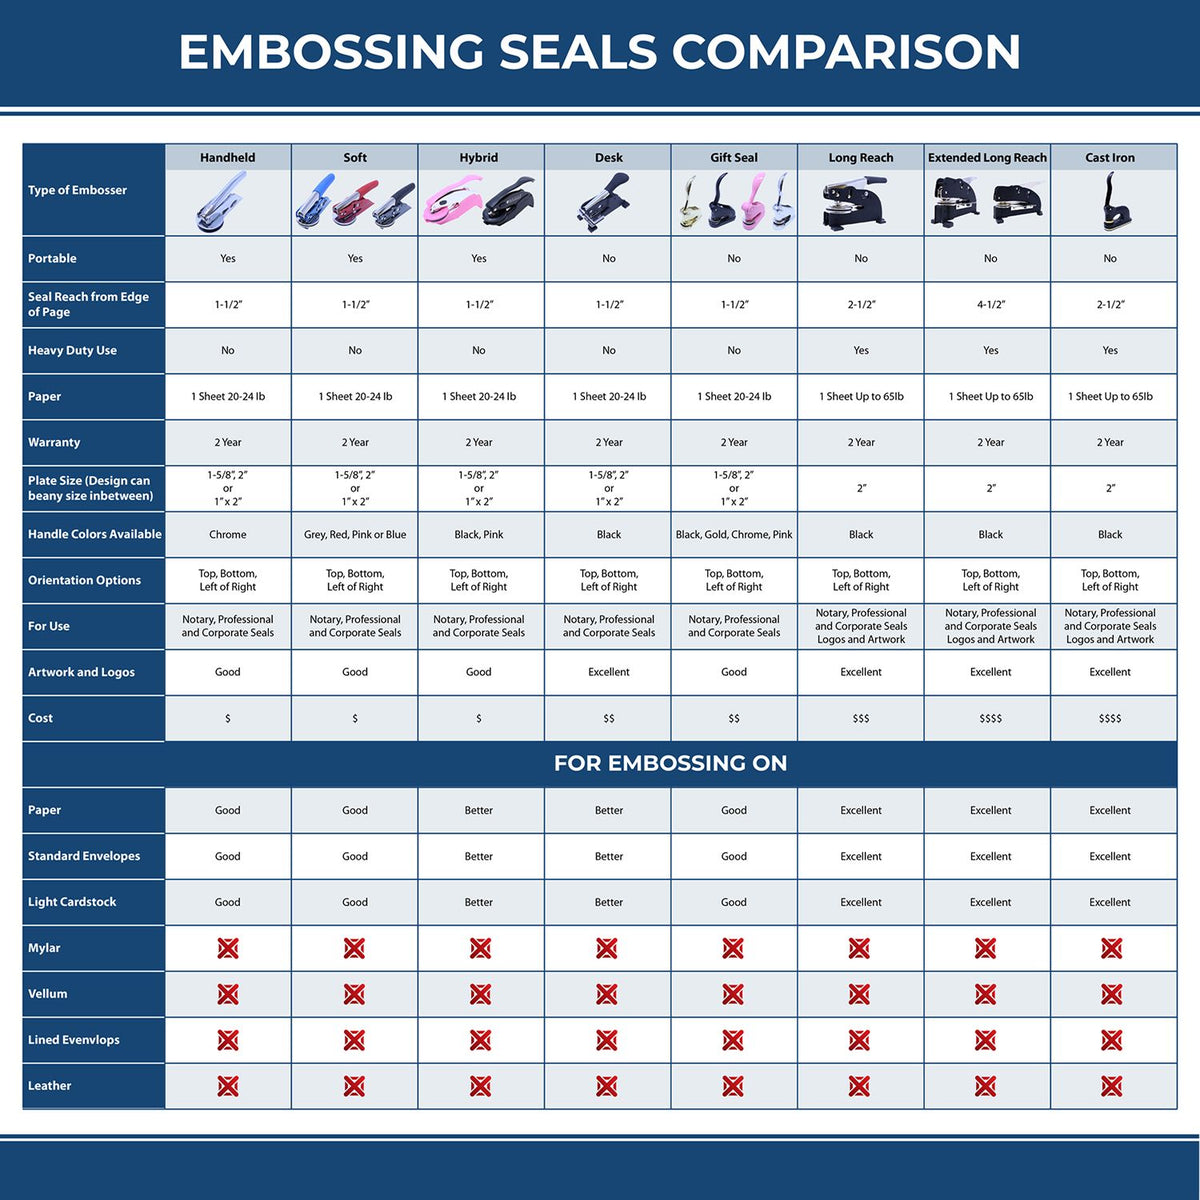 A comparison chart for the different types of mount models available for the State of New Hampshire Soft Land Surveyor Embossing Seal.